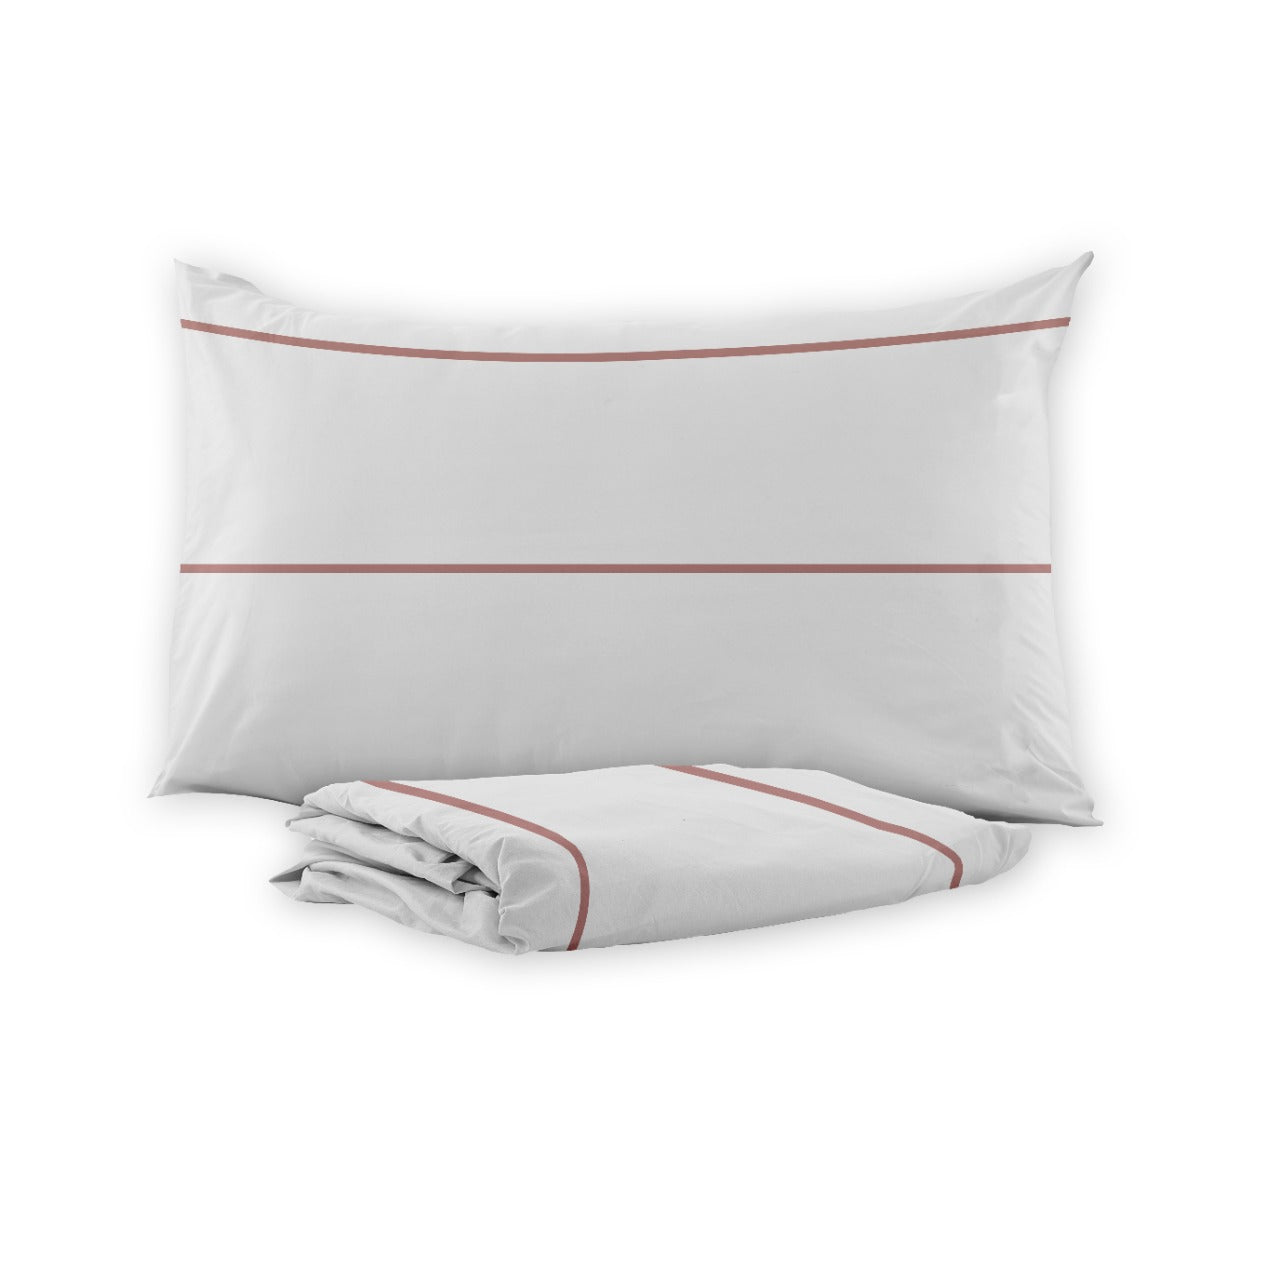 Ralonda- Printed Fitted Cotton Sheet Set (Linen & 2 Pillow cases)